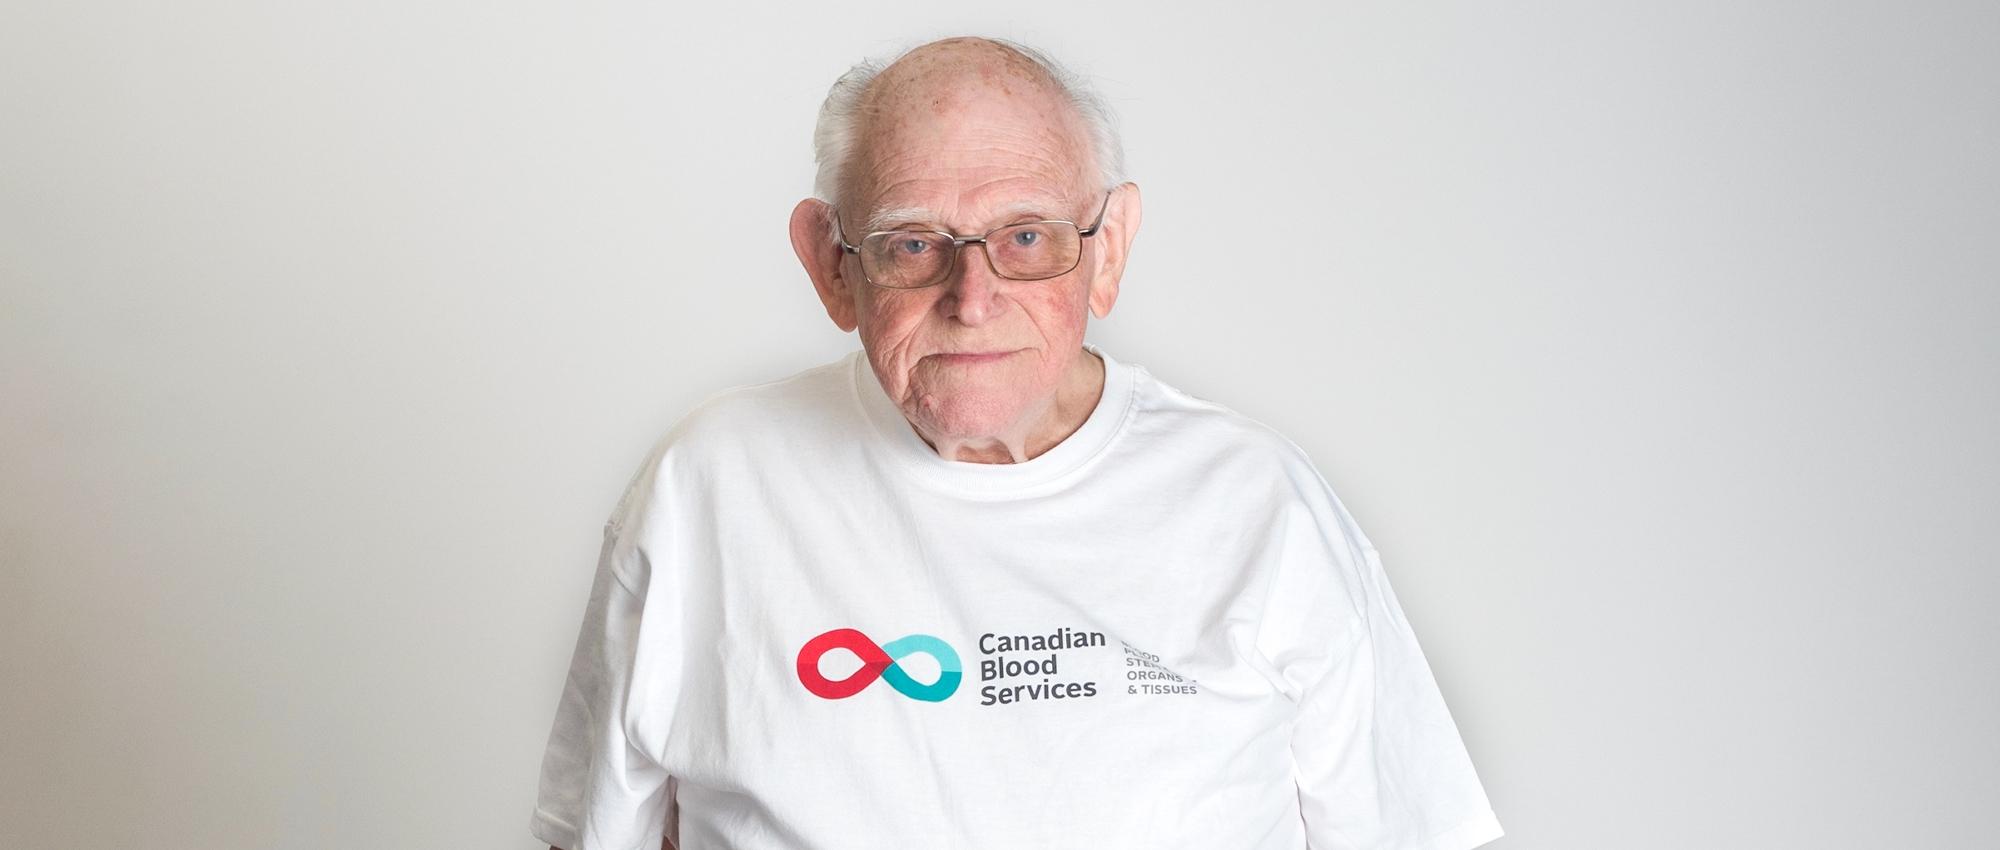 Thumbnail image of Bob Kerr wearing a Canadian Blood Services T-shirt standing in front of a white wall.